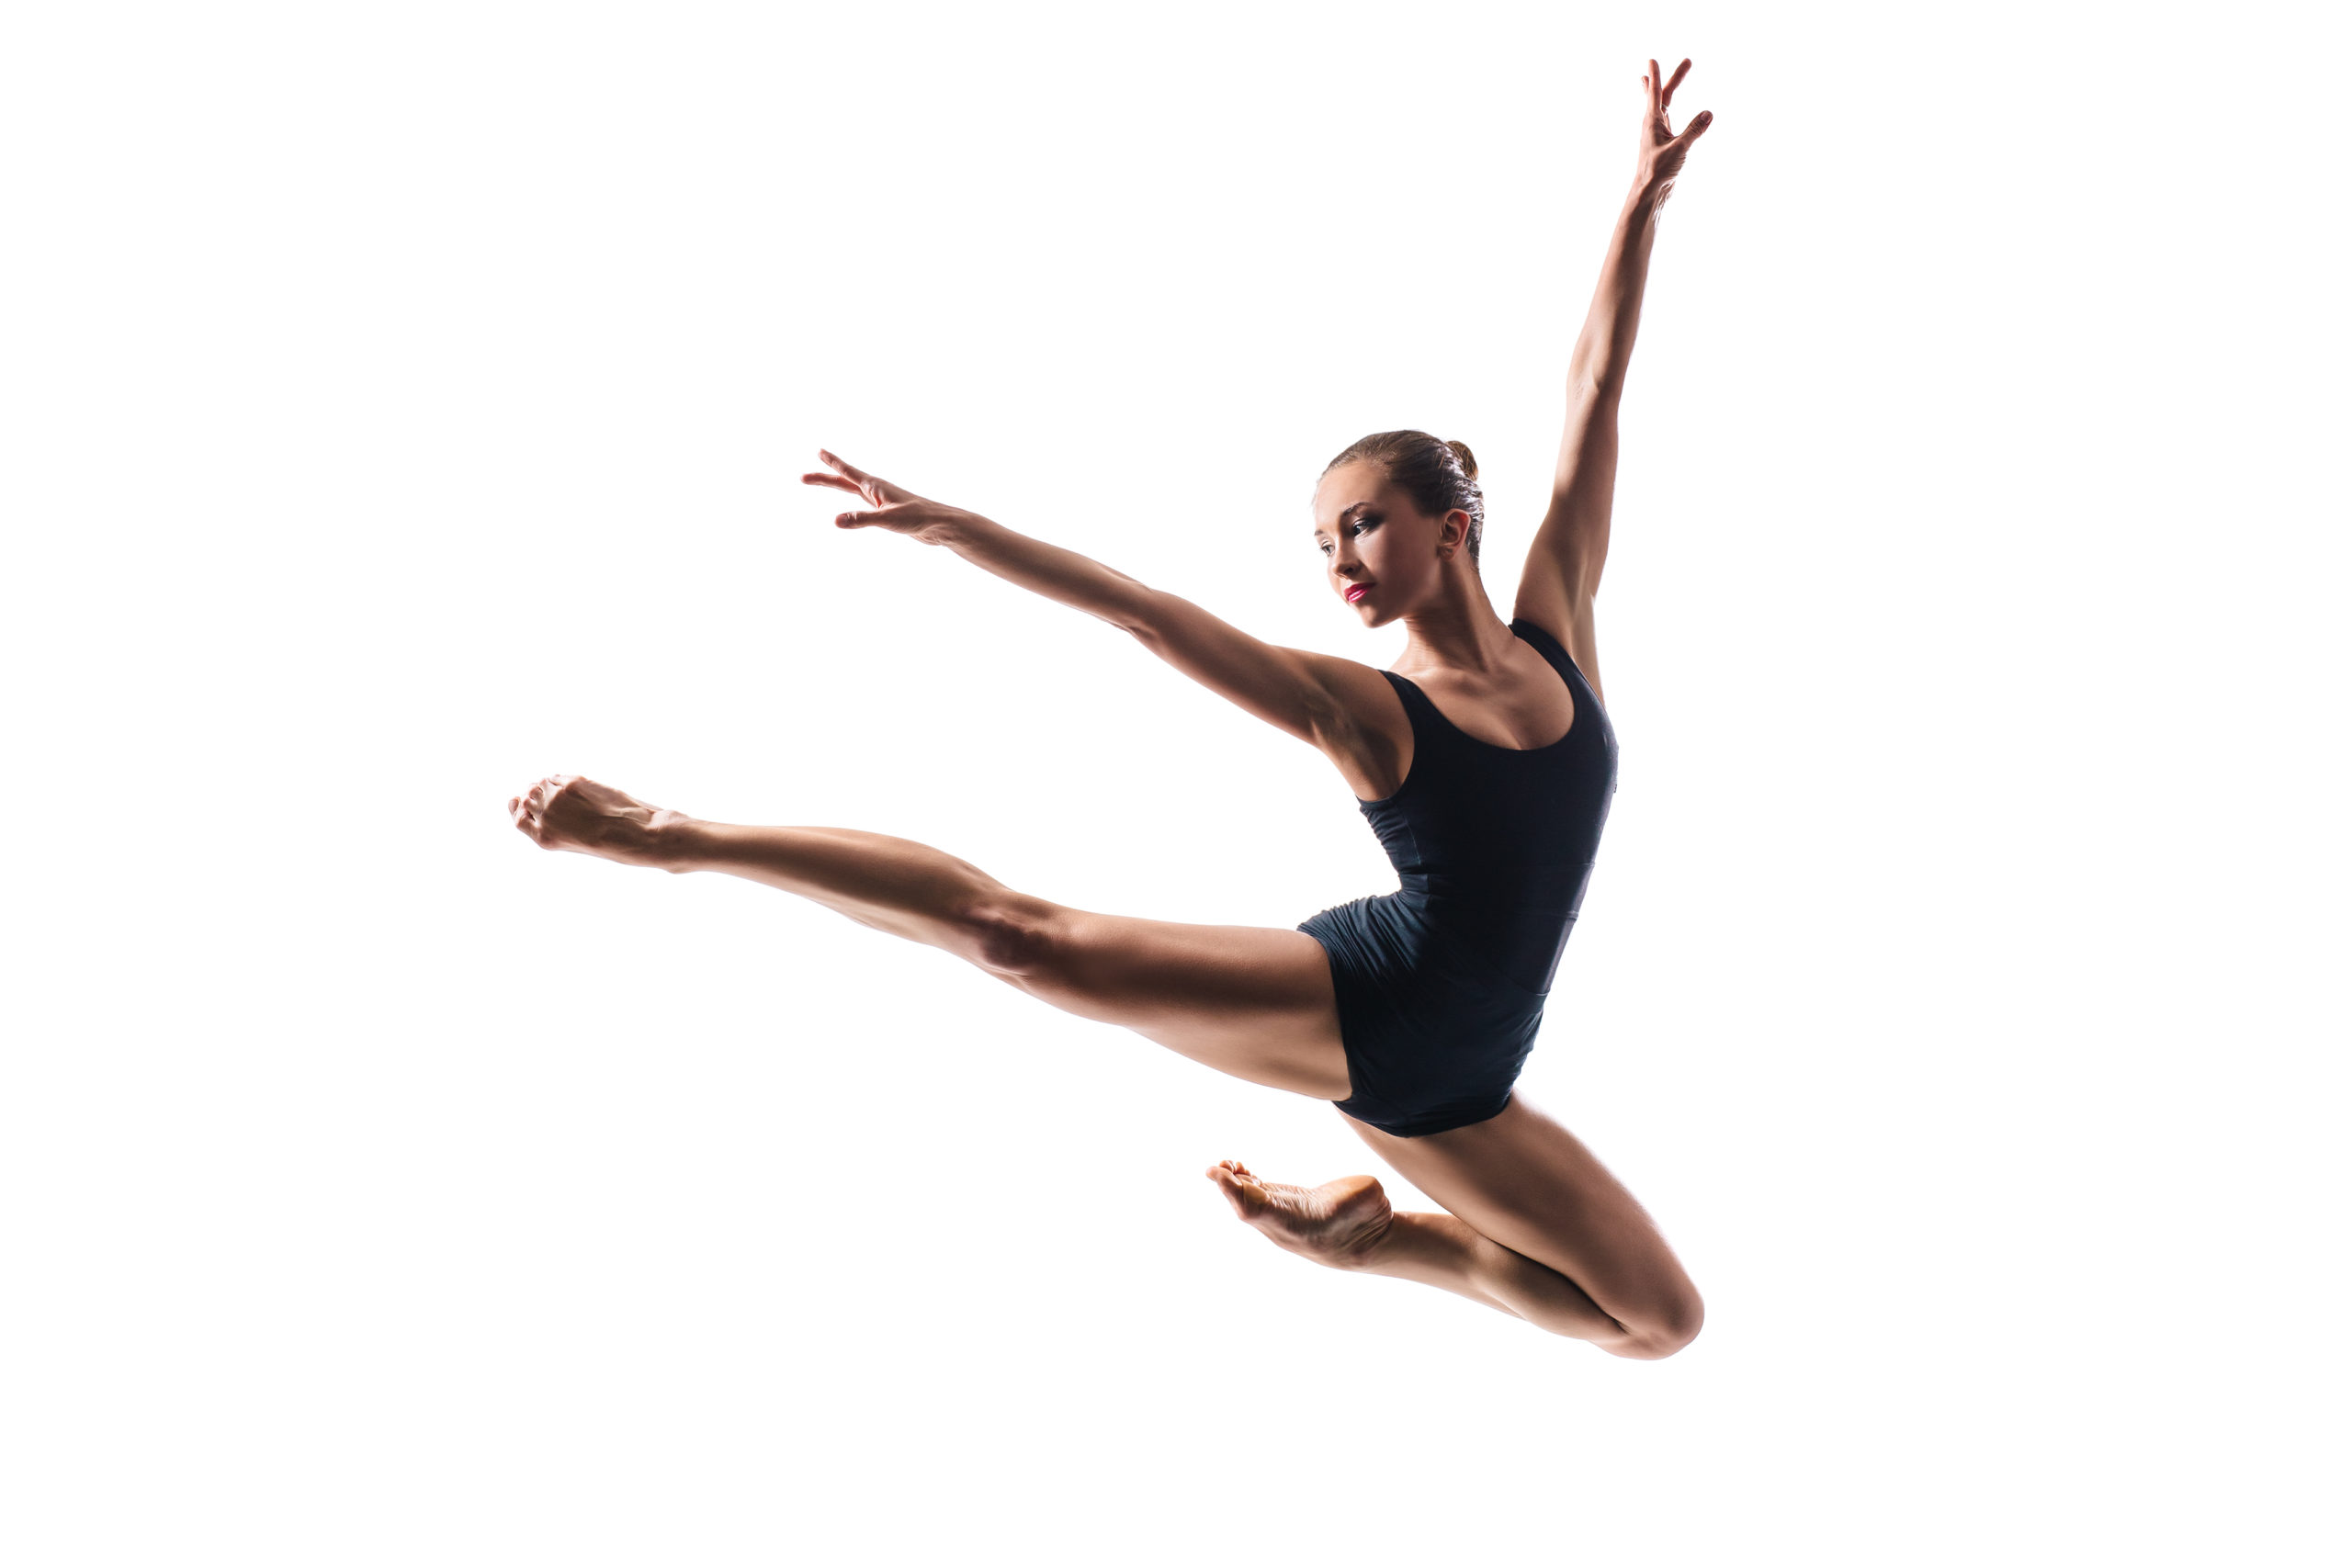 Ballet dancer jumping high against white isolated background